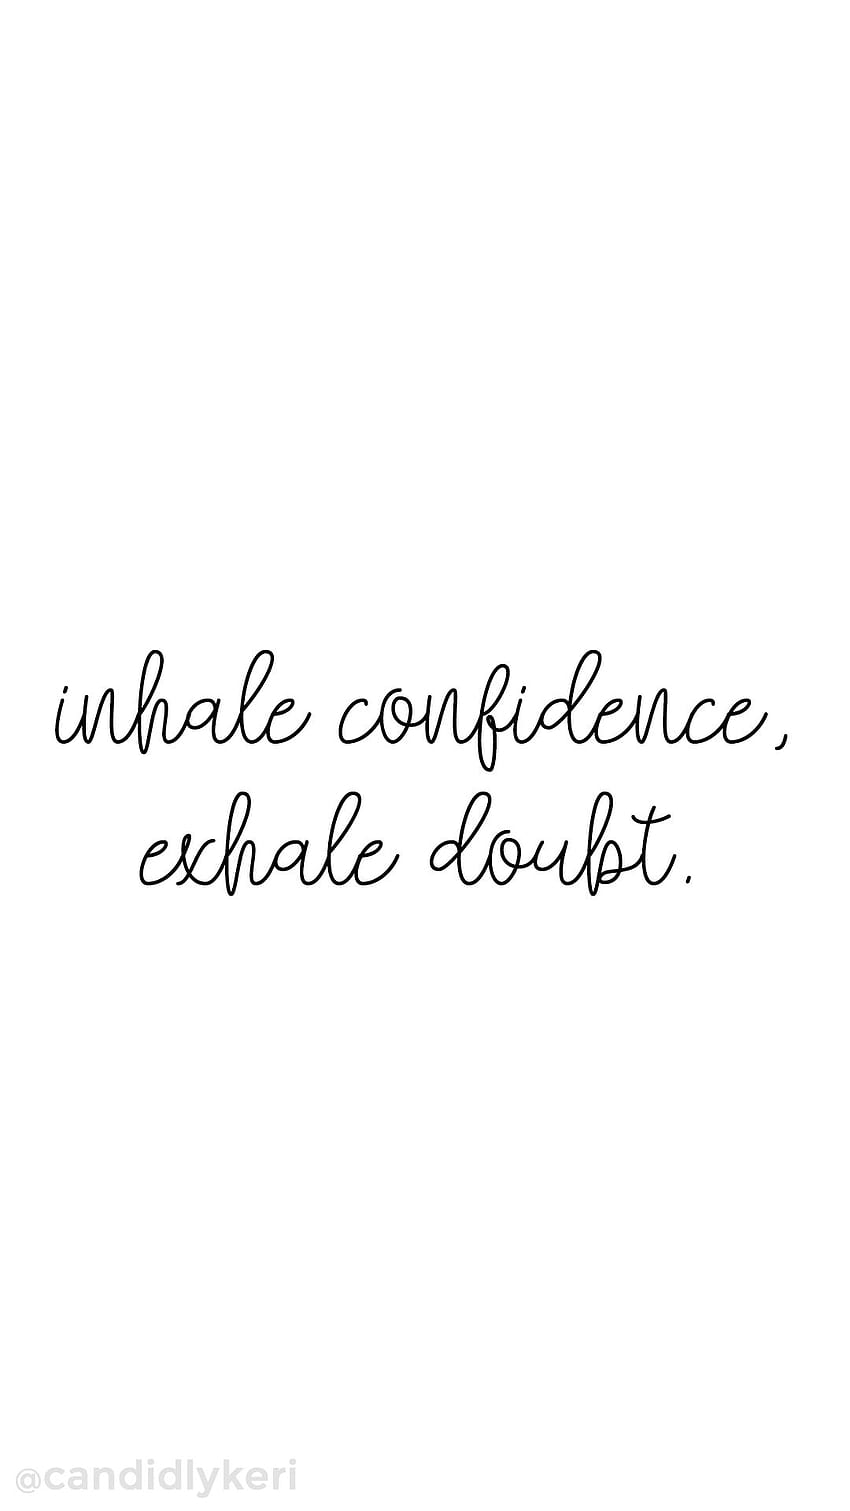 Inhale Confidence exhale doubt quote inspirational you can for on the. Doubt quotes, Inspirational quotes background, Inspirational quotes HD phone wallpaper